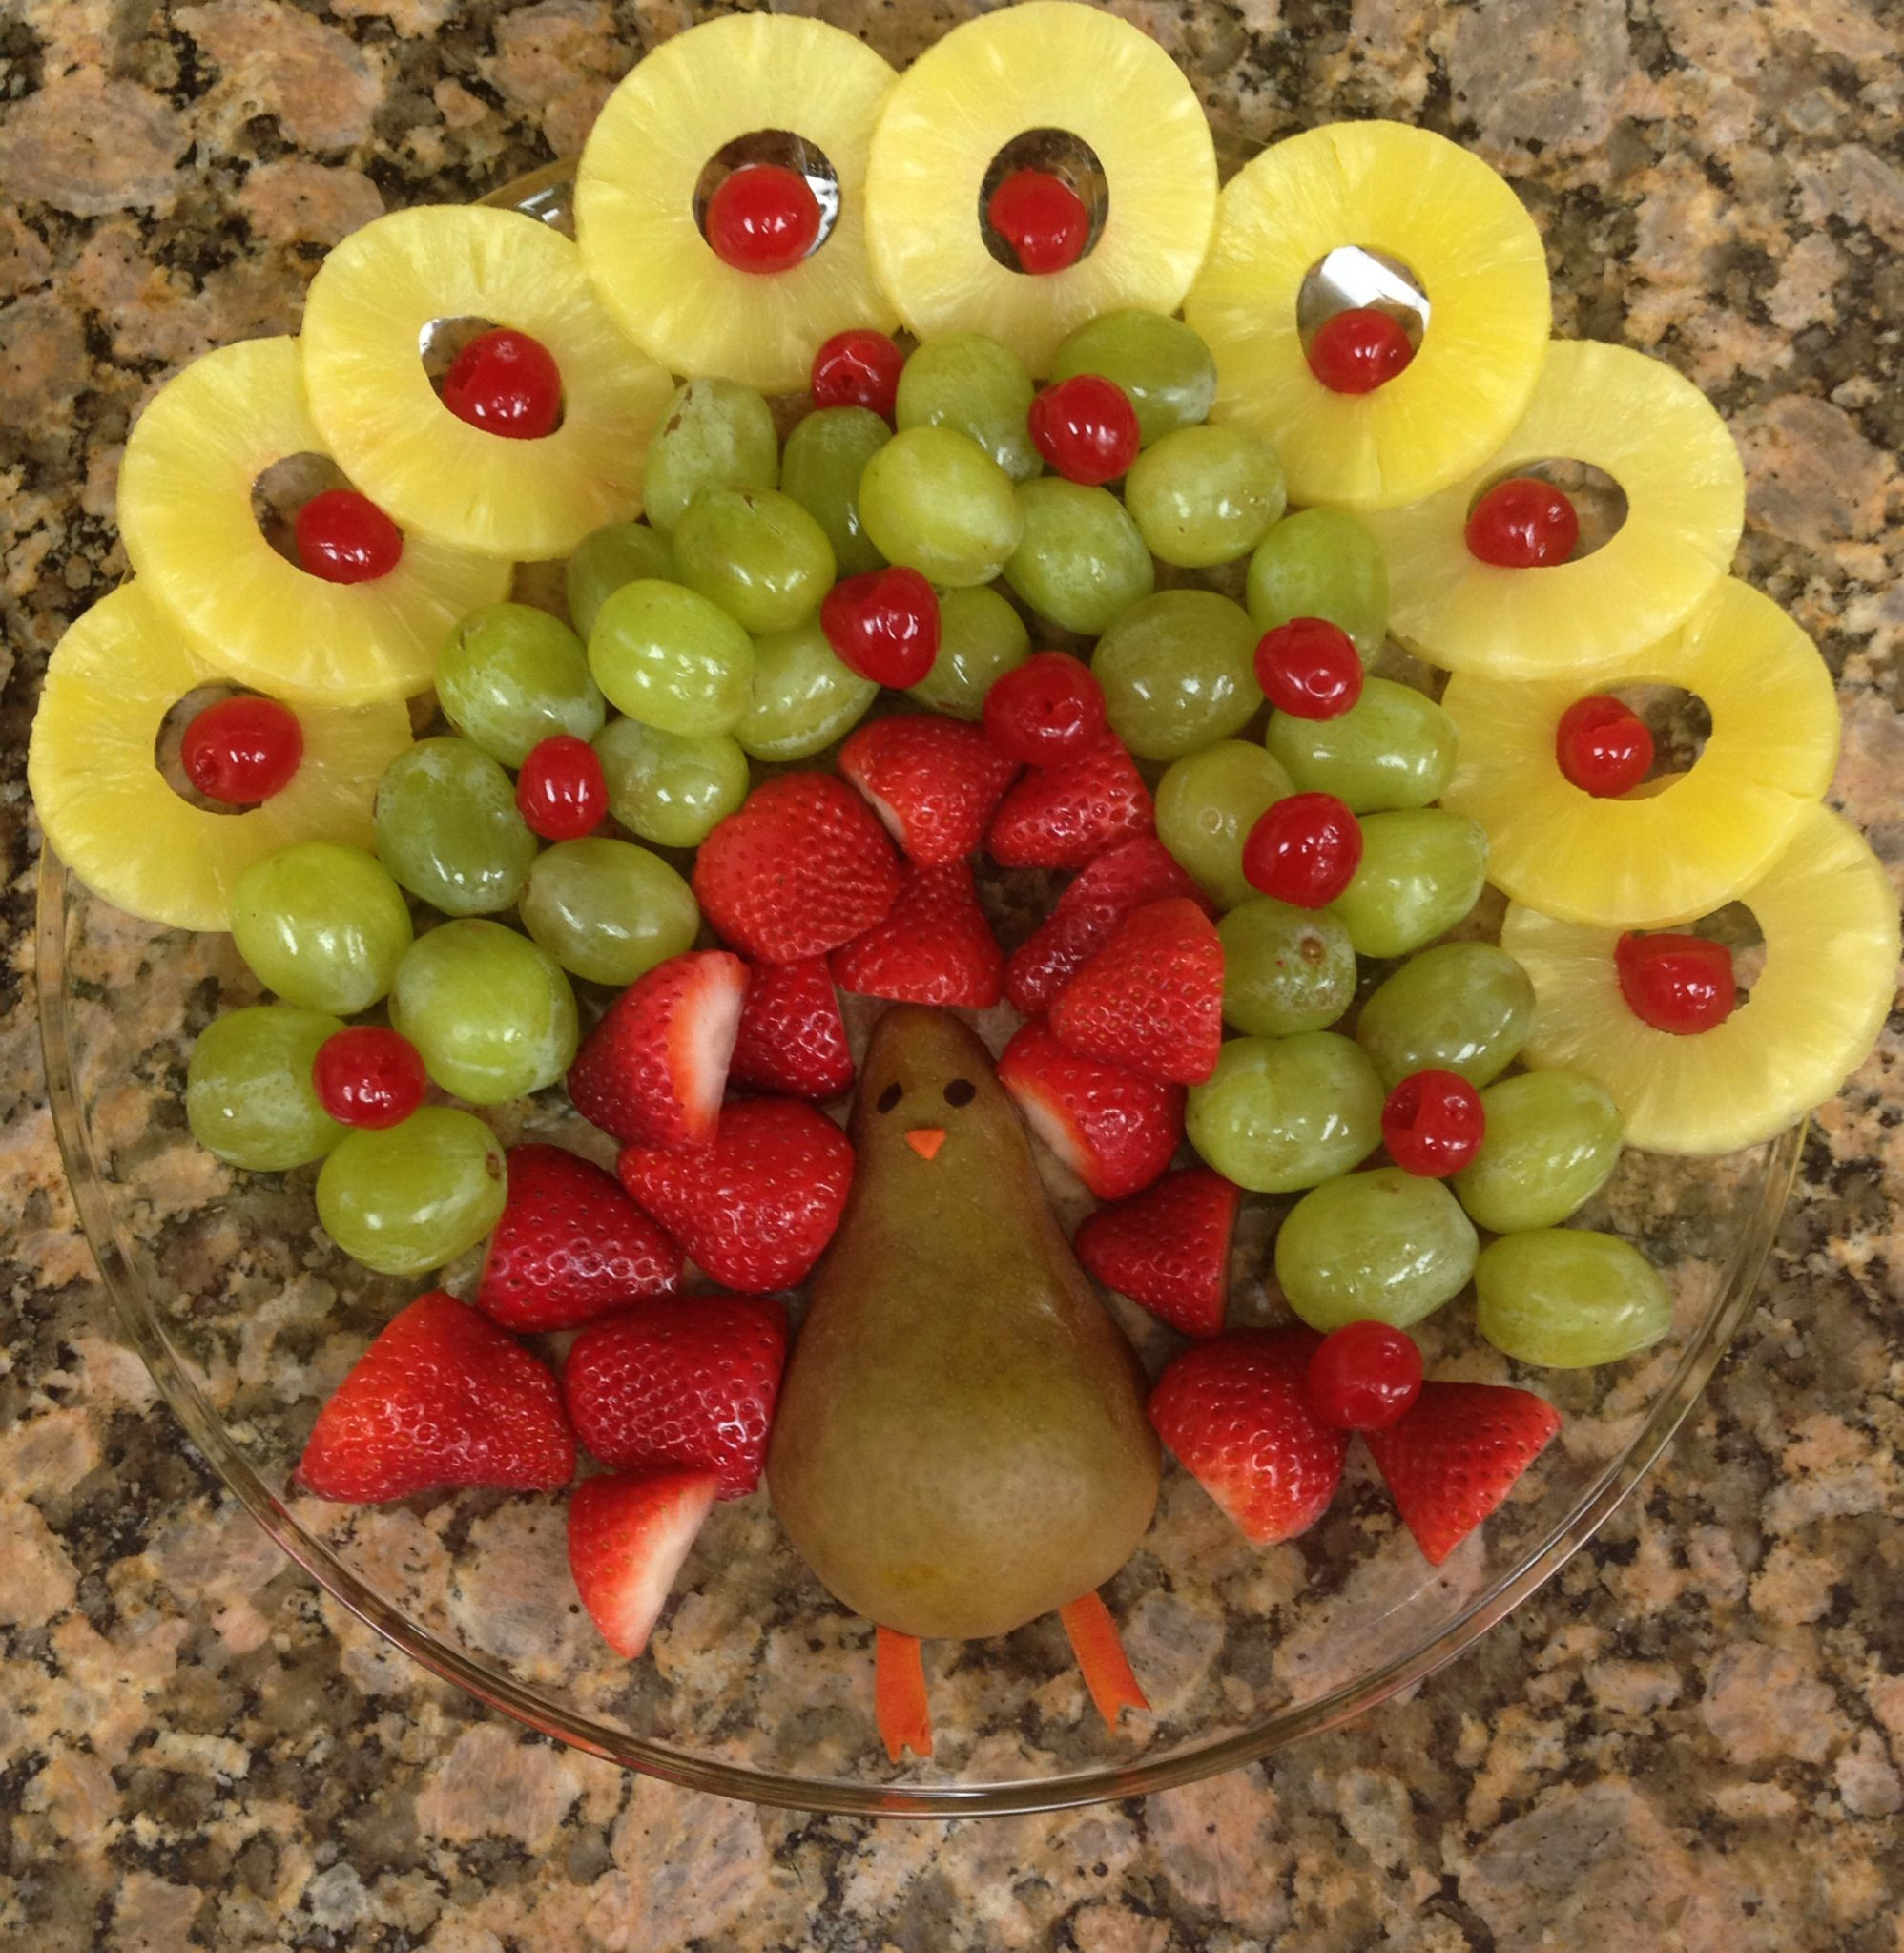 Thanksgiving Fruit Platter Ideas
 Turkey Fruit Platter making this to bring to the in laws